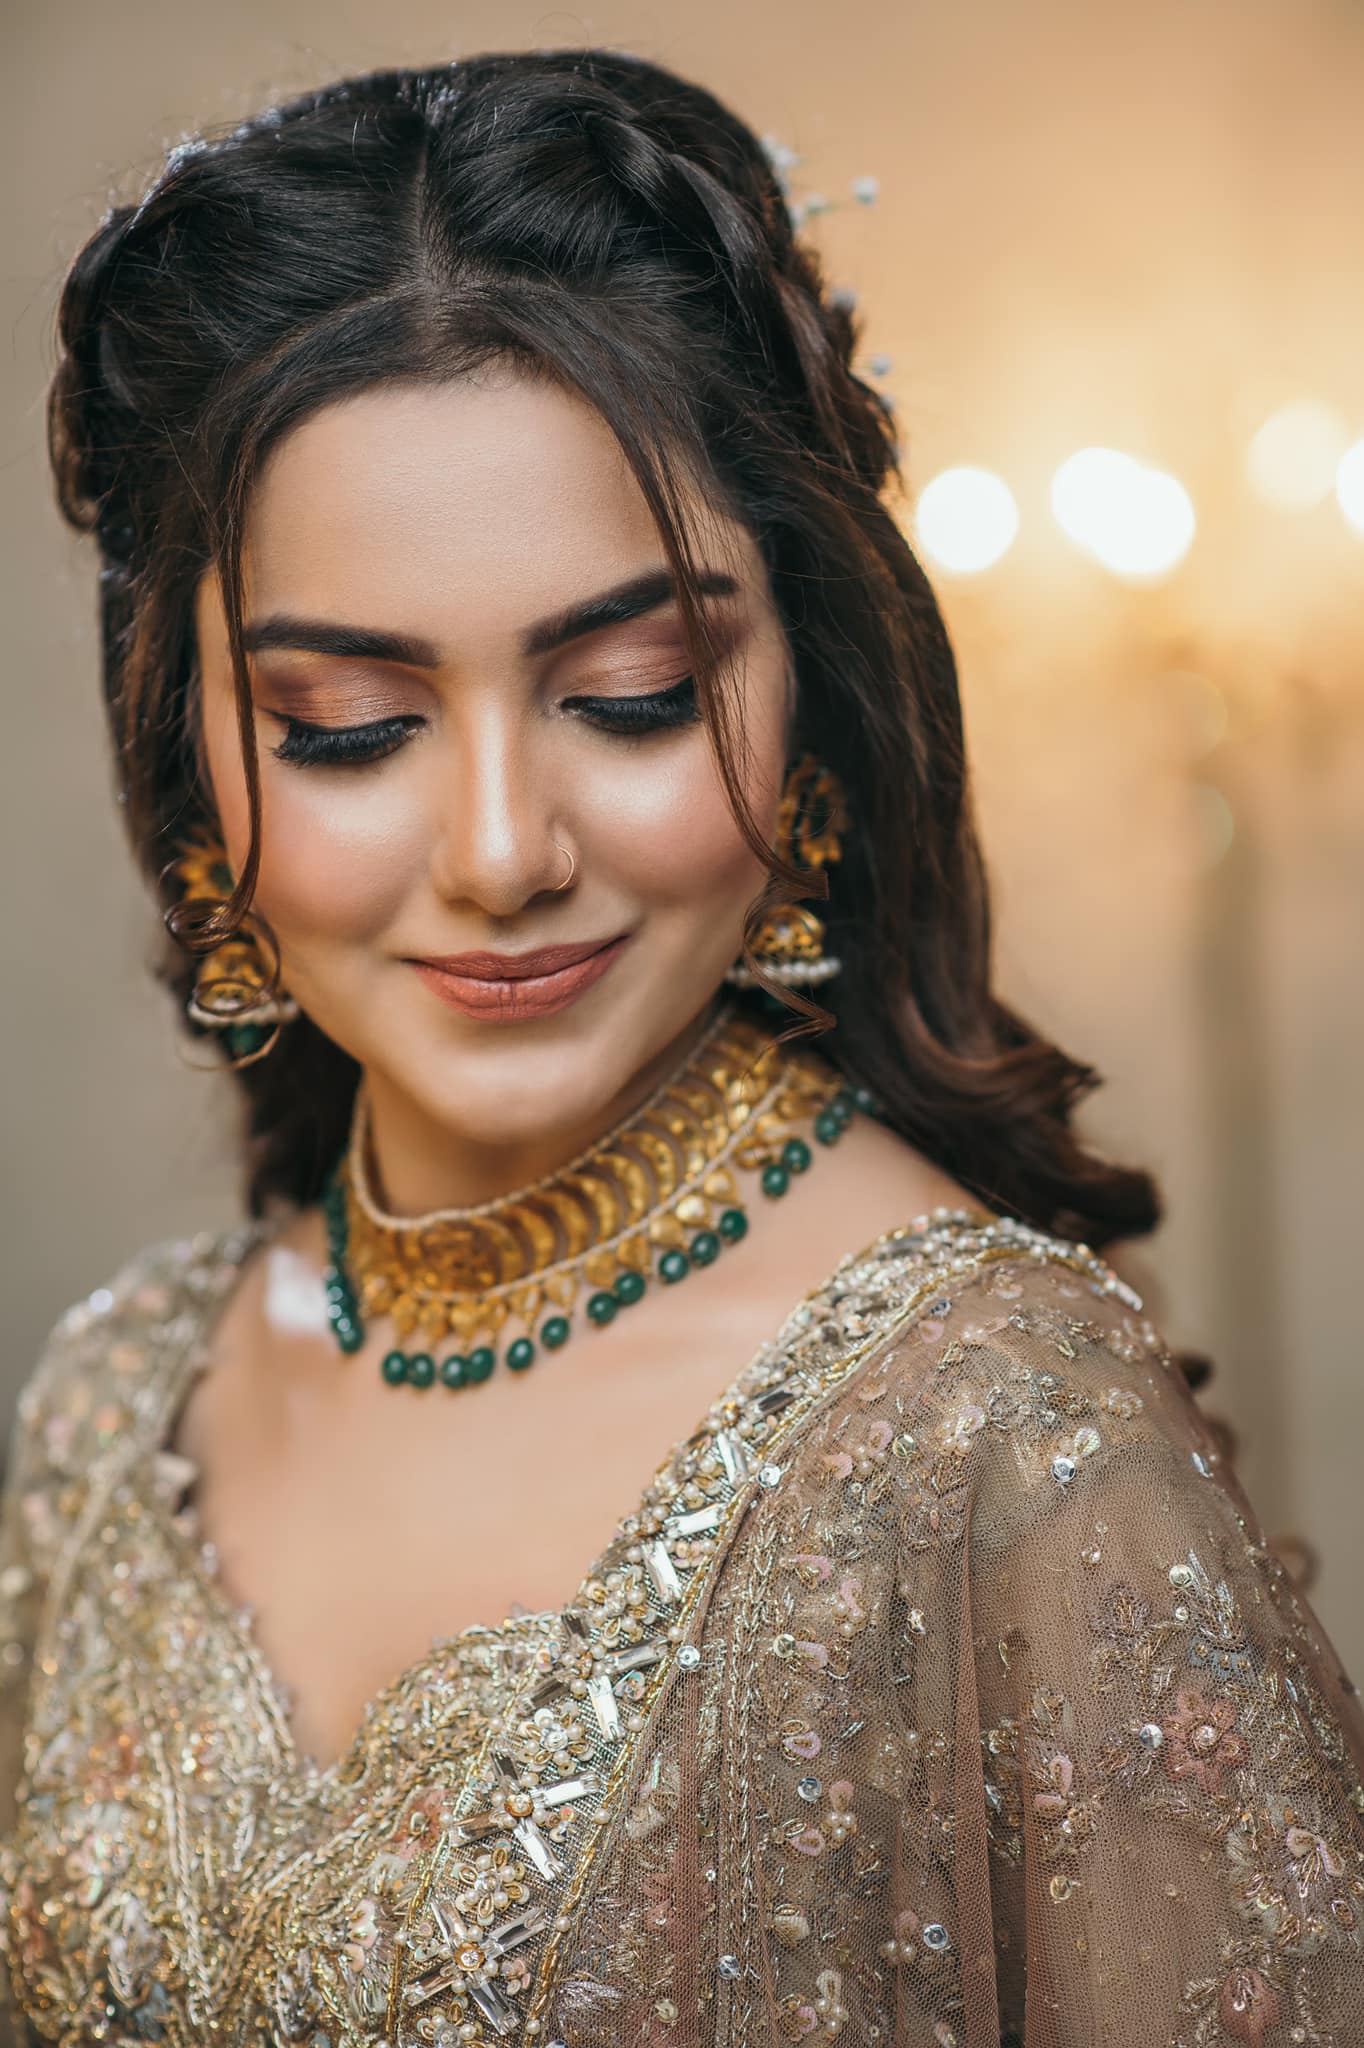 Bronzed Makeup Look for Engagement in Lehenga - engagement look for bride